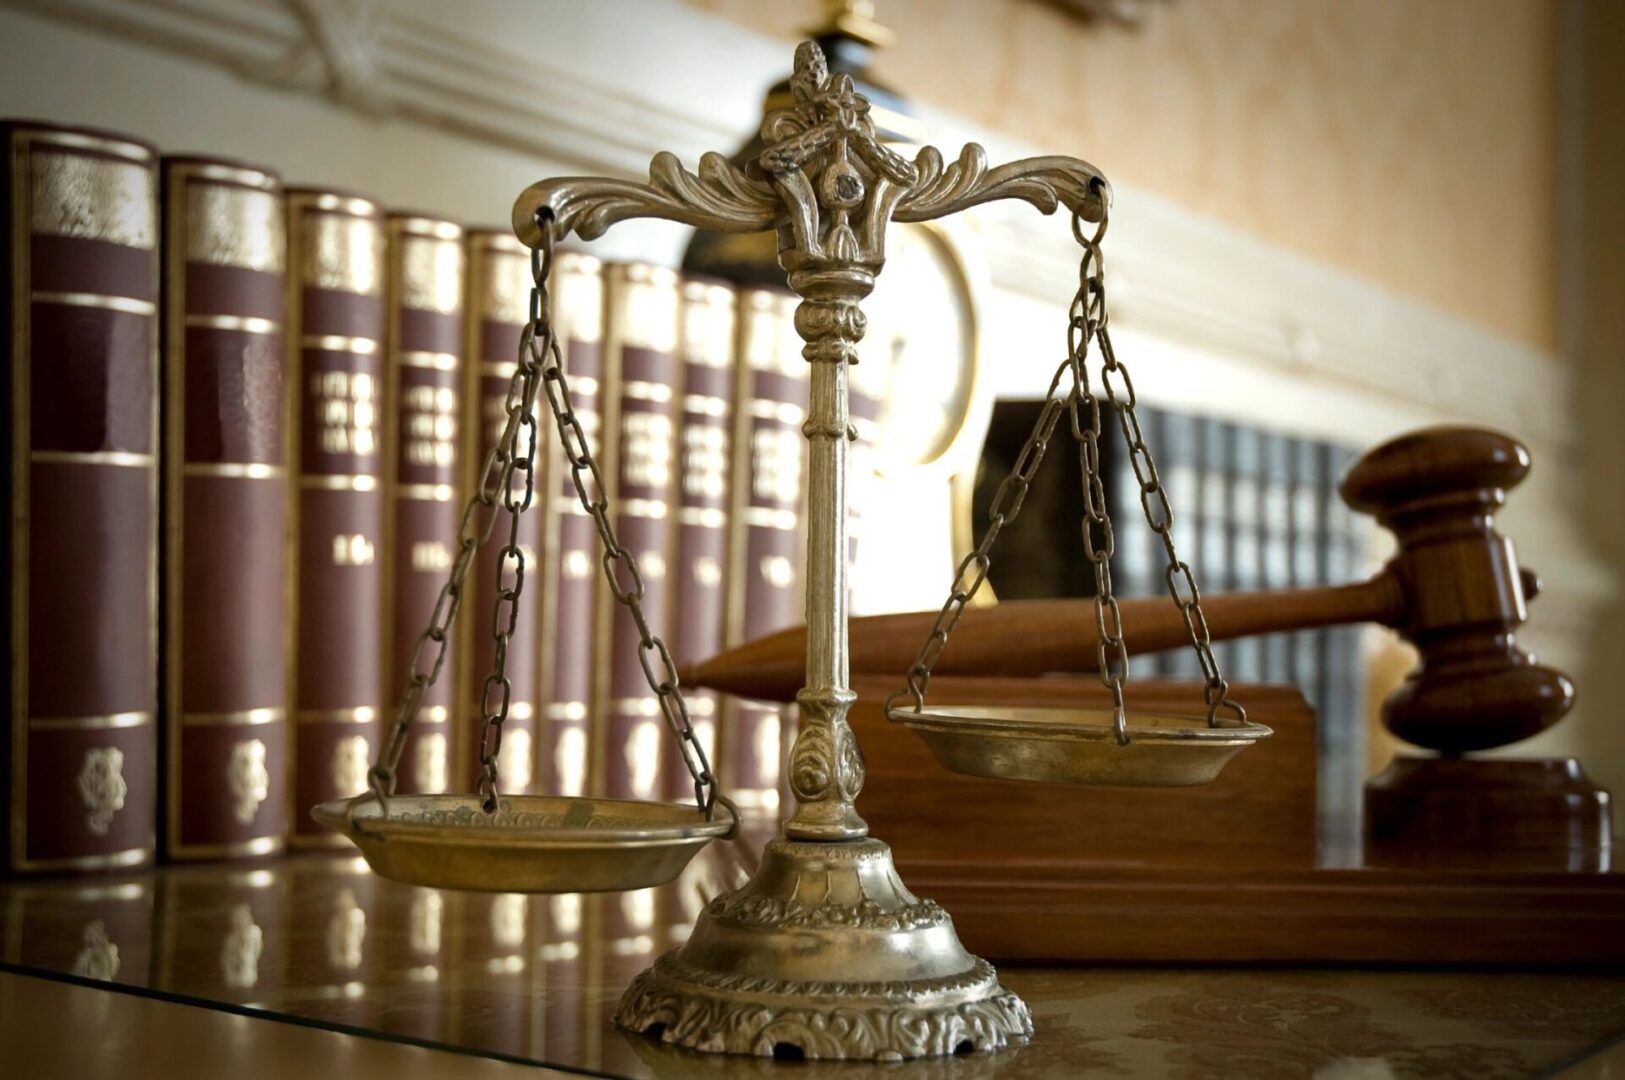 Law and justice scales in a courtroom